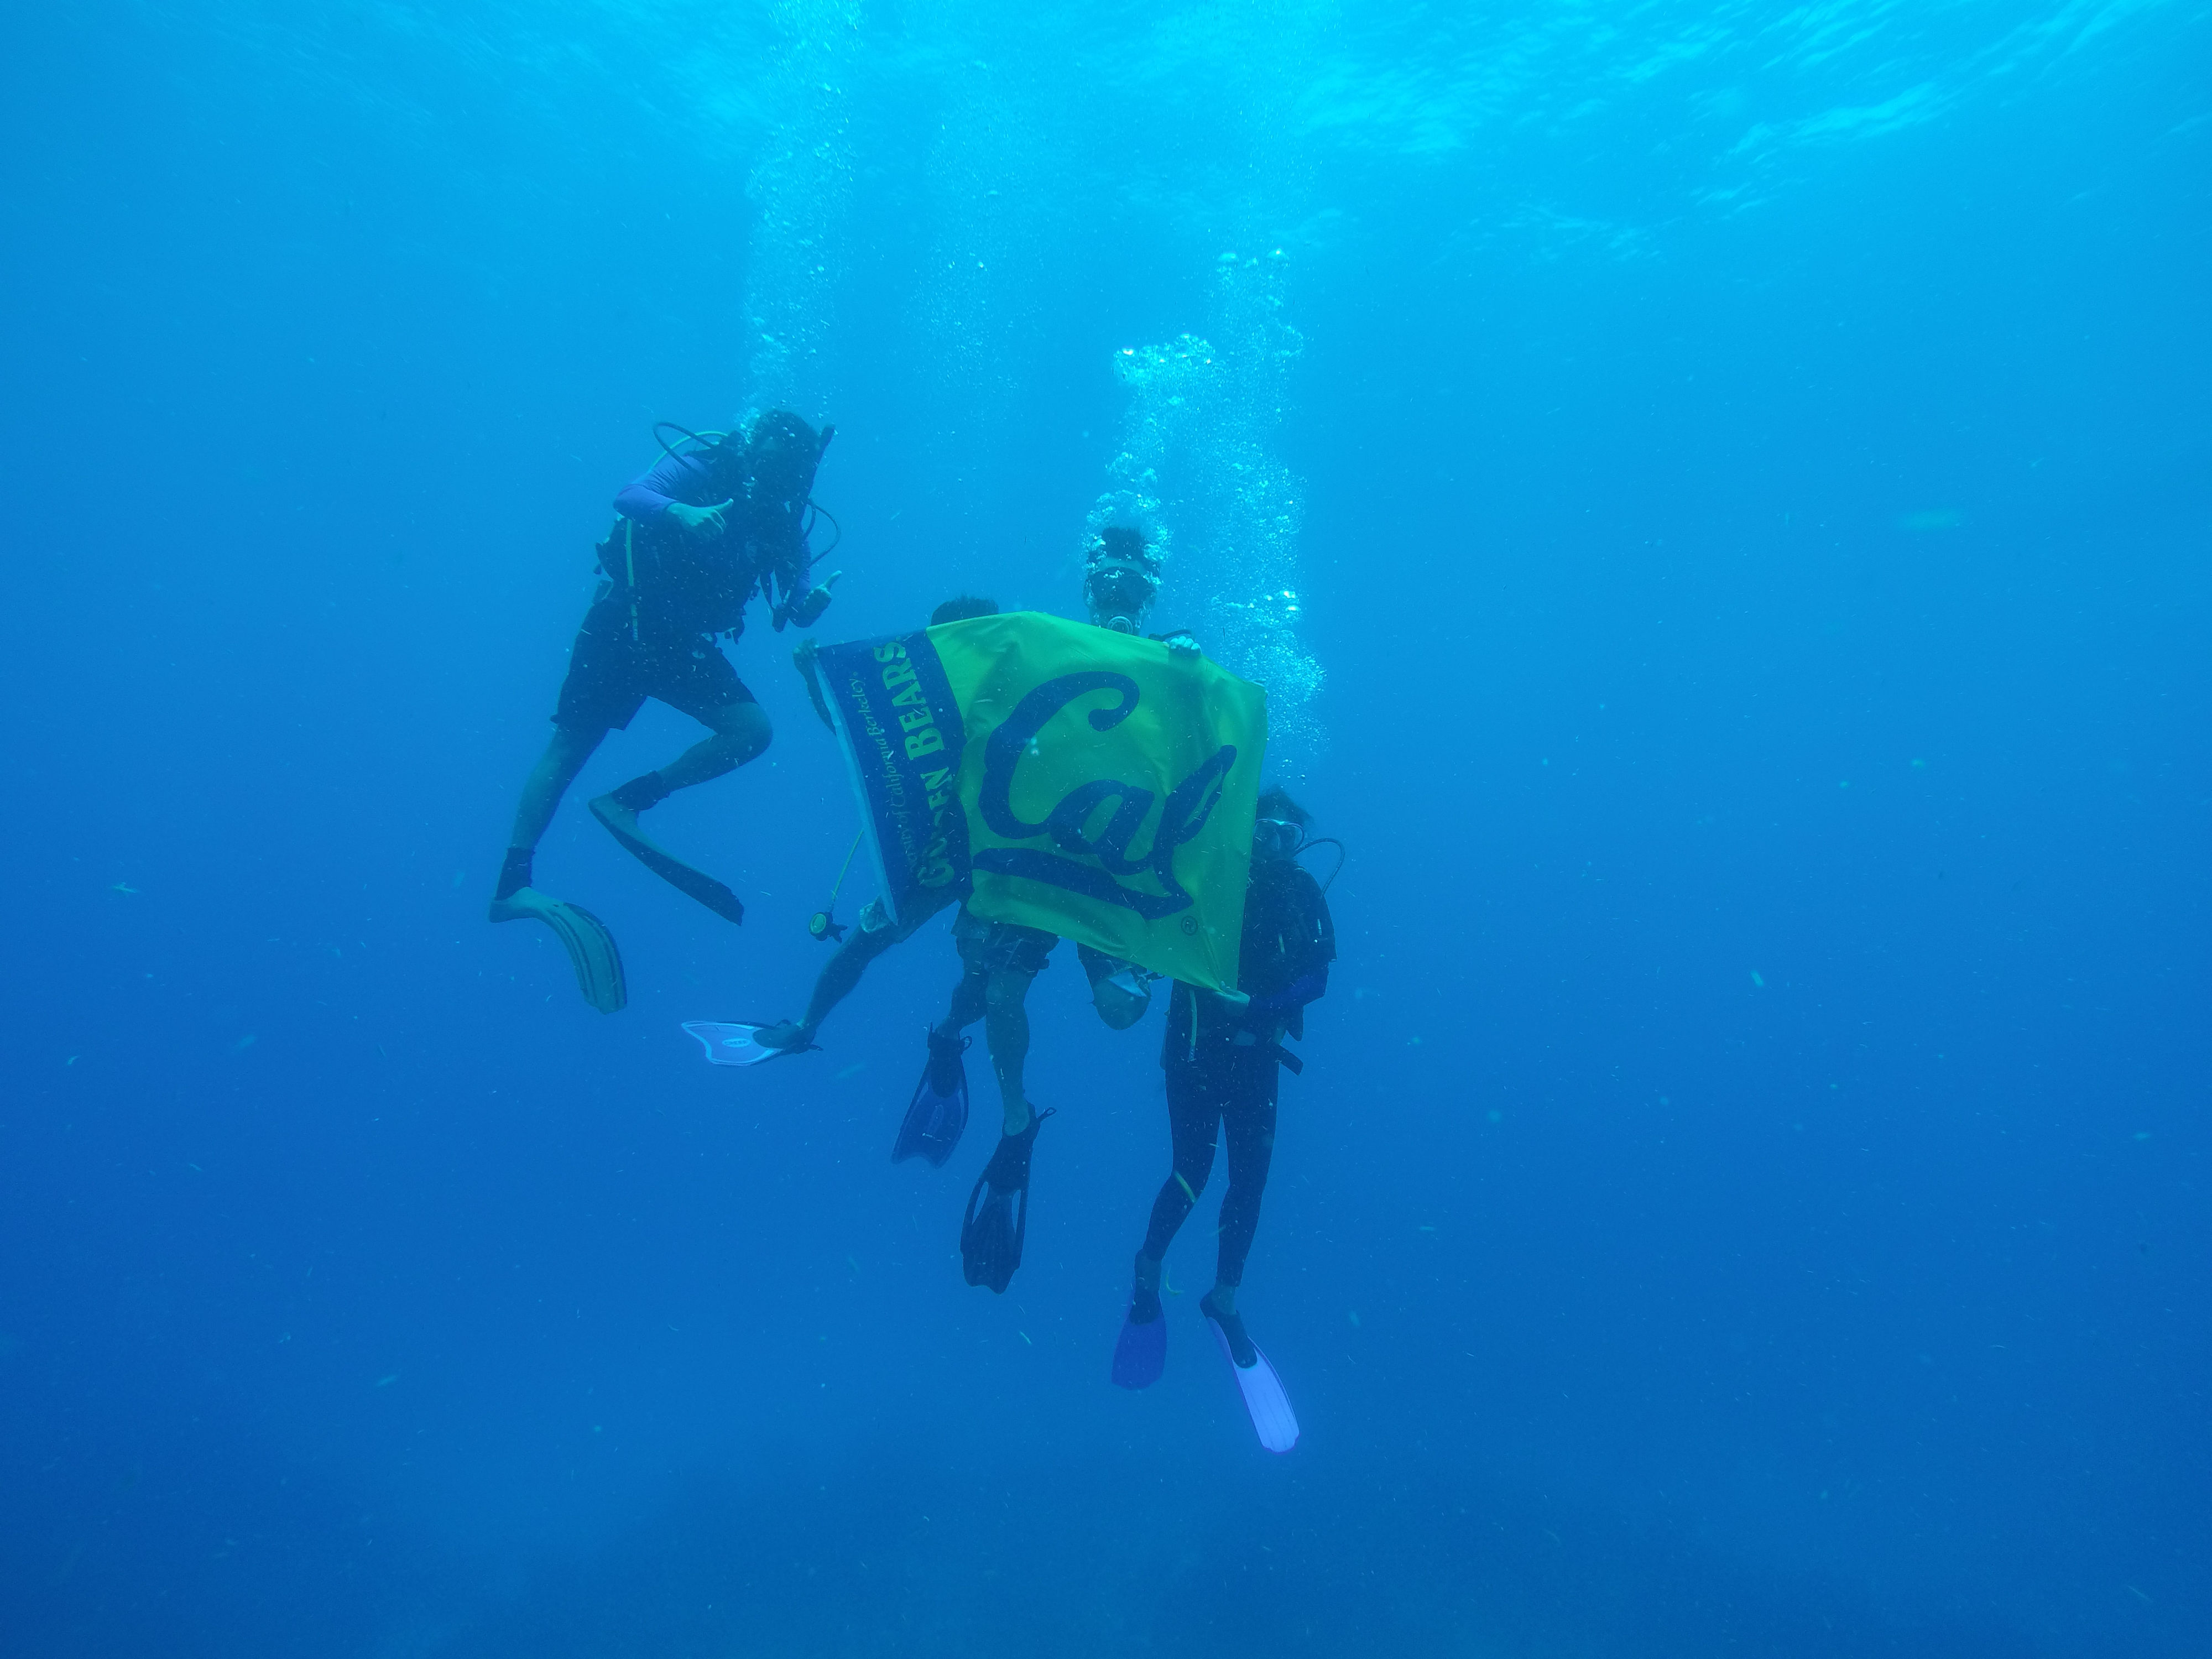 Team dove in the Glover’s Reef Atoll to unfurl the CAL flag at a depth of 100 feet underwater!